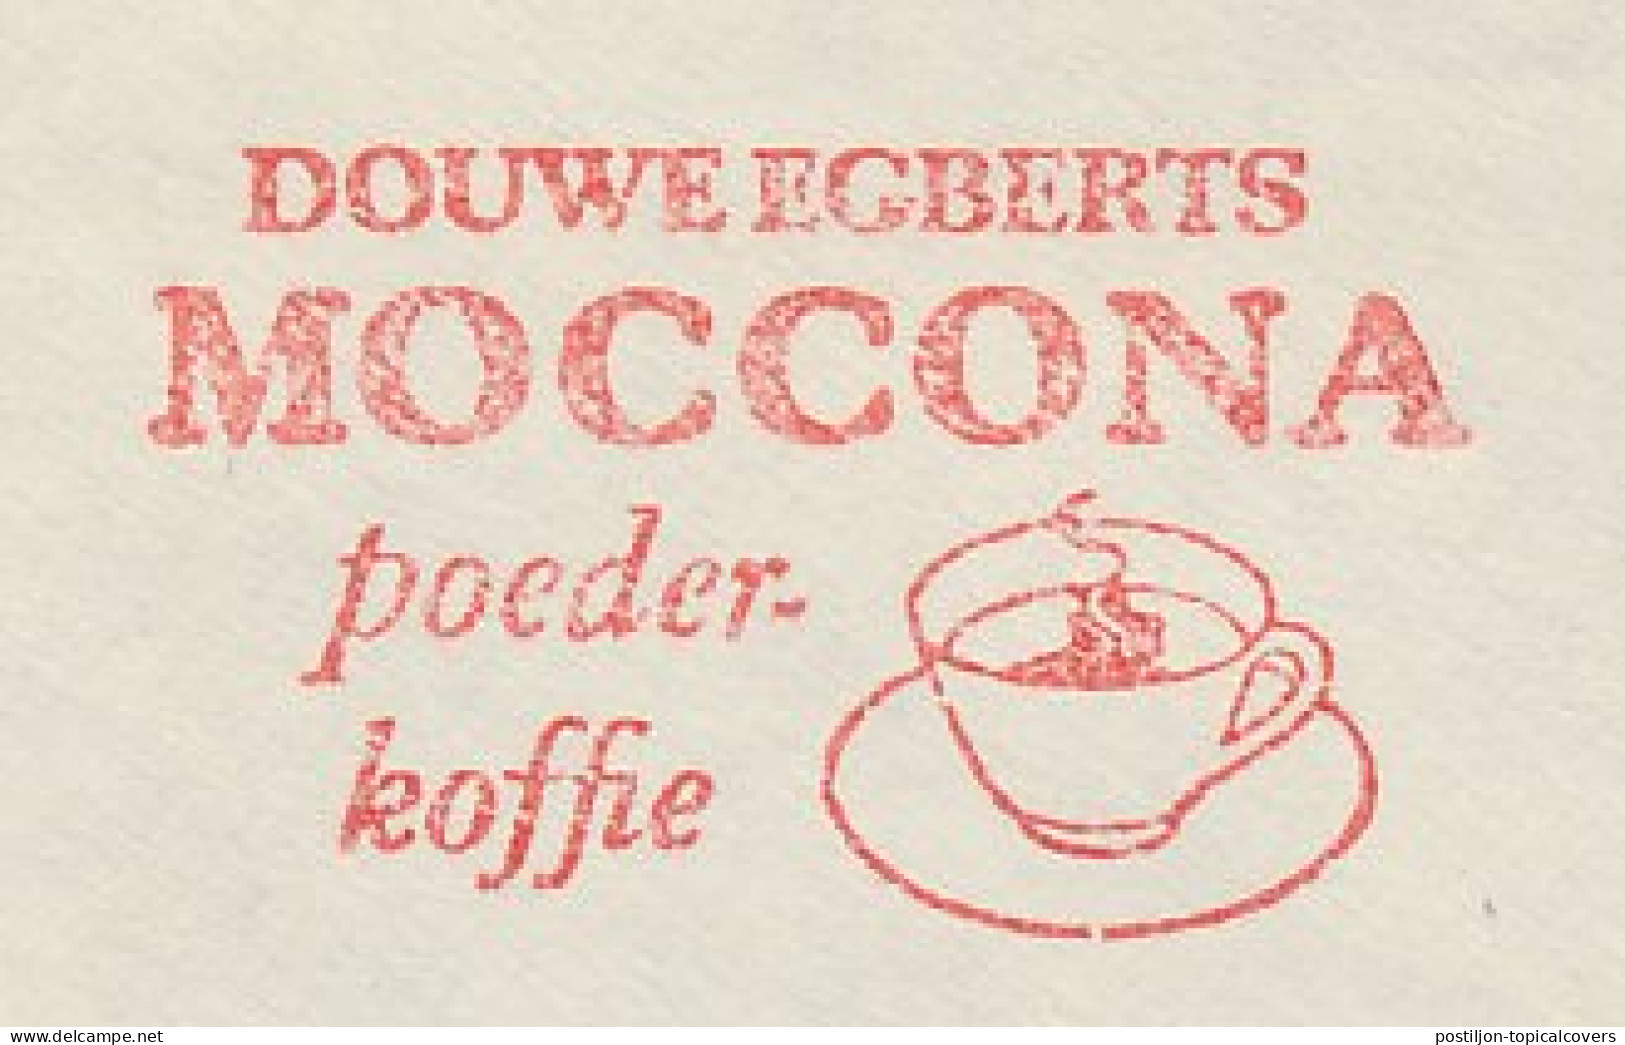 Meter Cover Netherlands 1959 Moccona - Powder Coffee - Douwe Egberts - Utrecht - Other & Unclassified